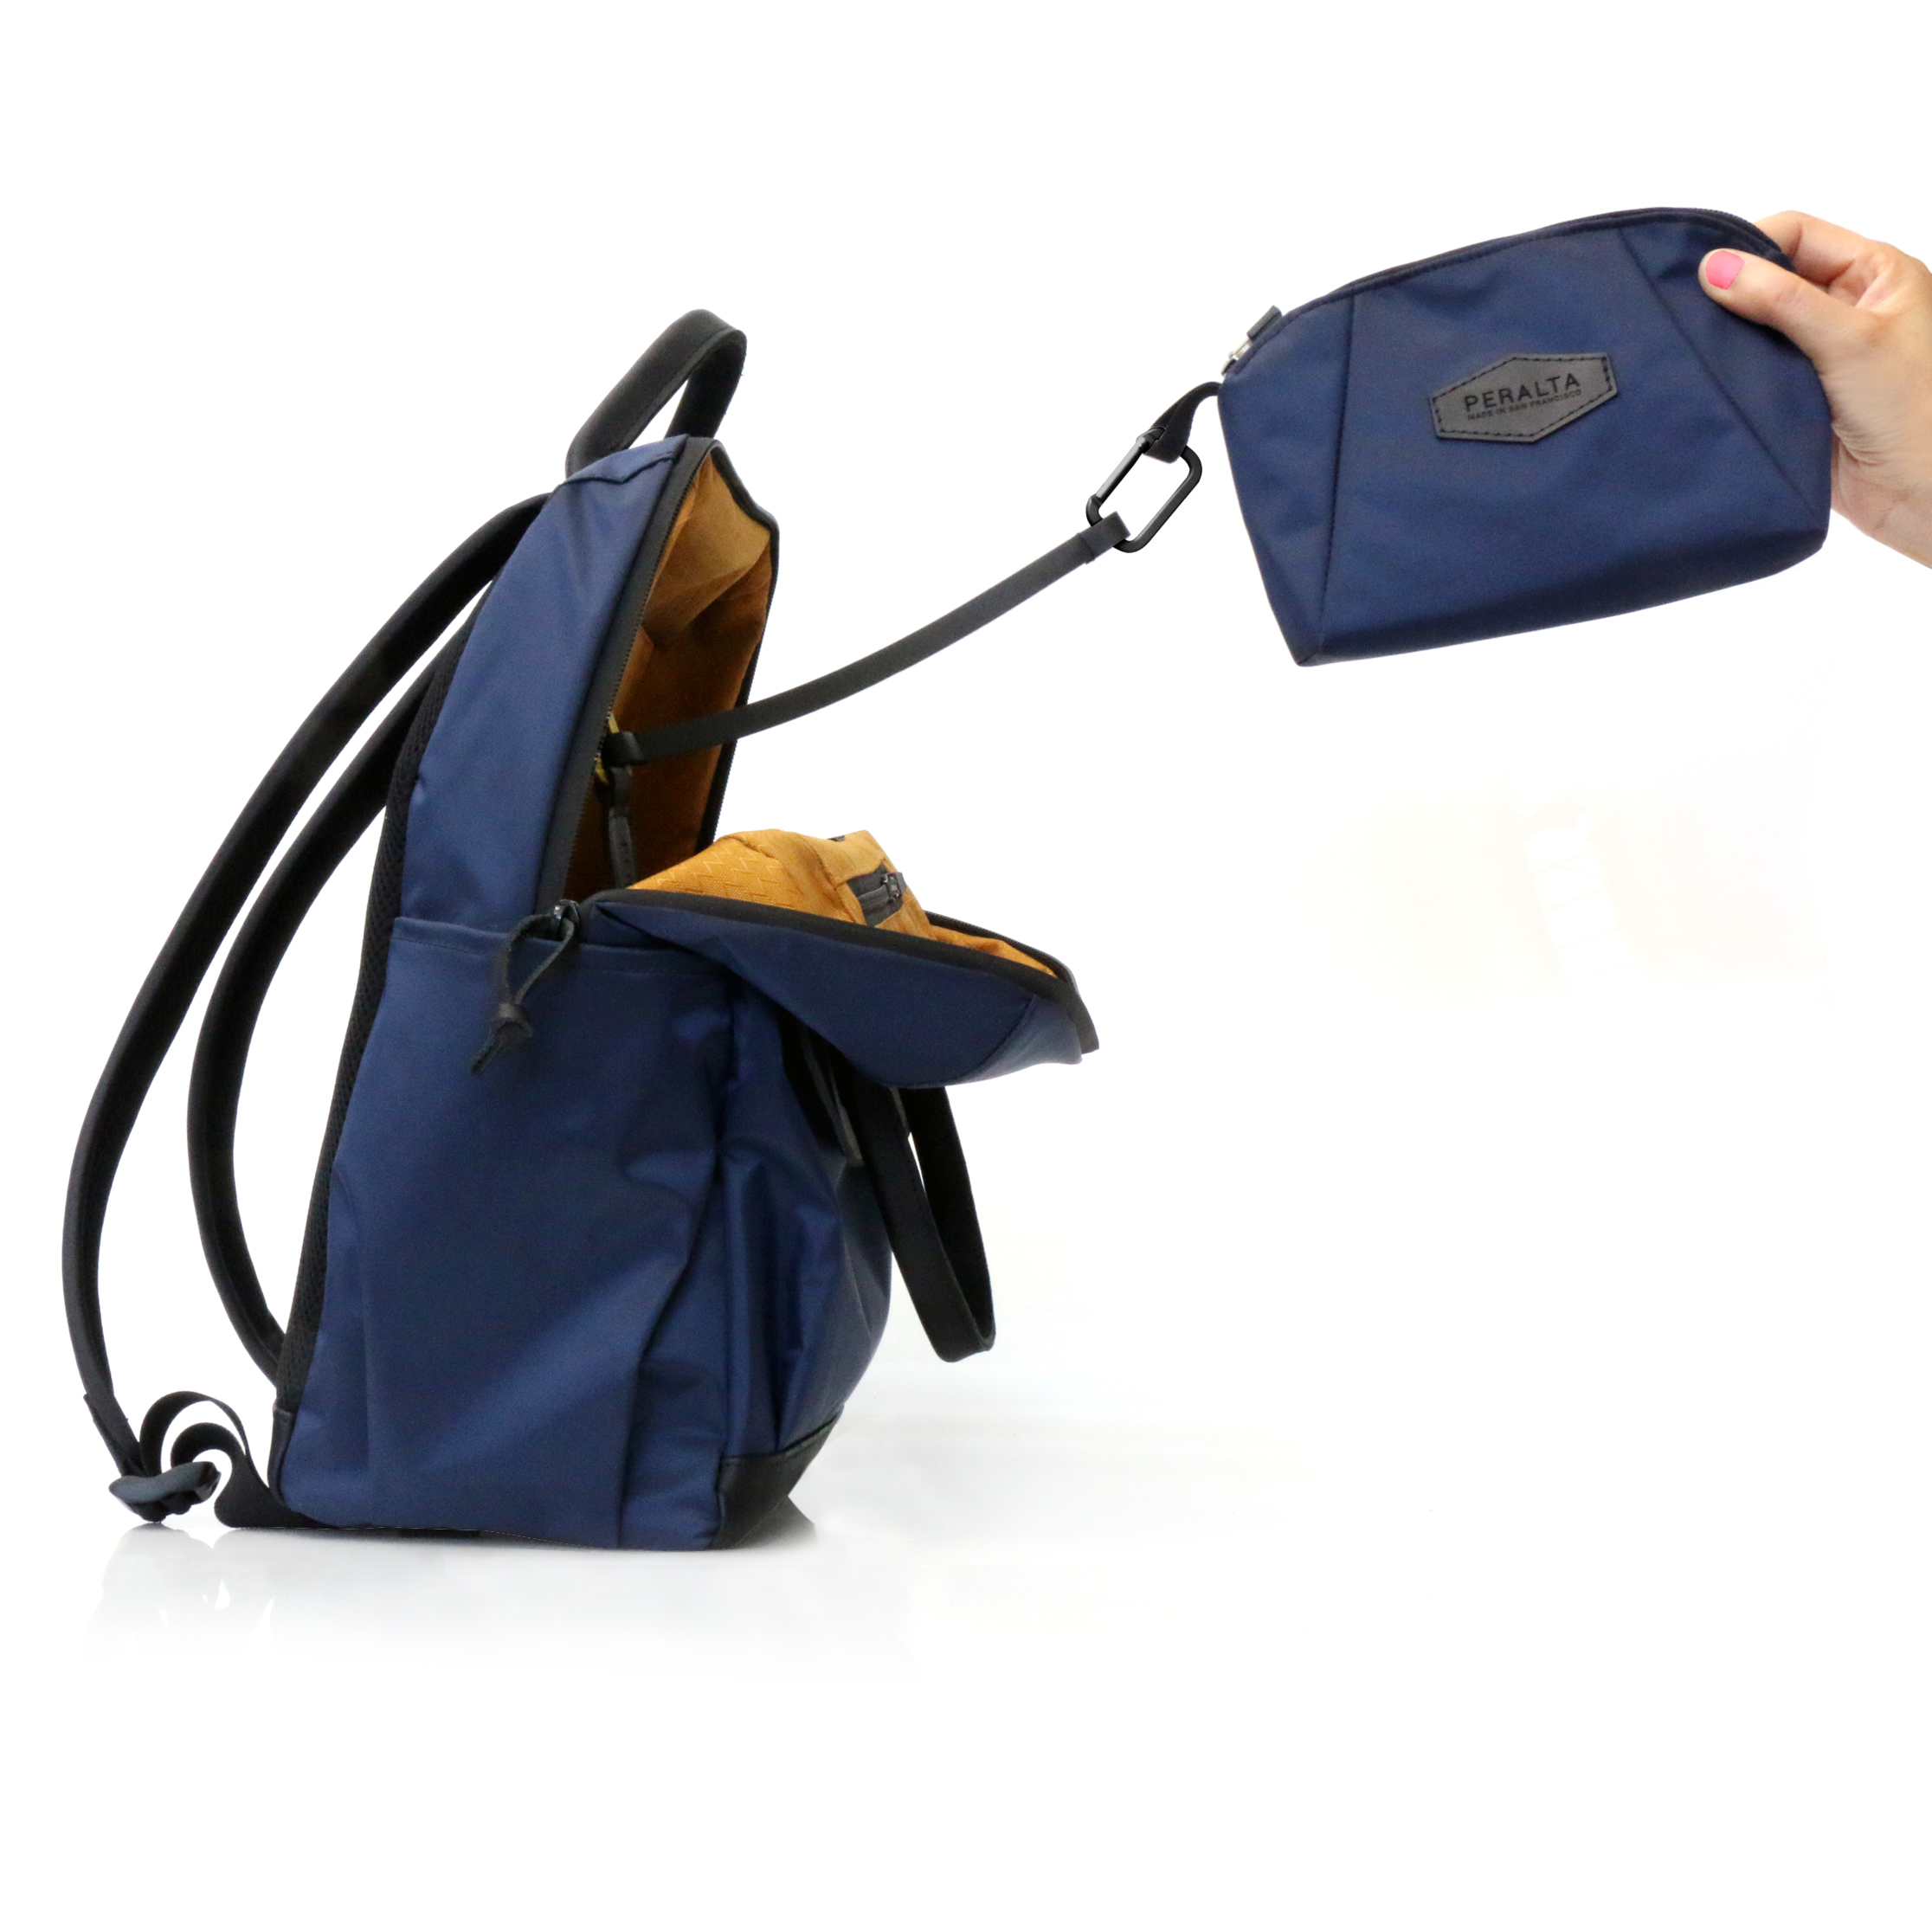 Balani Backpack with Etta Pouch tethered in